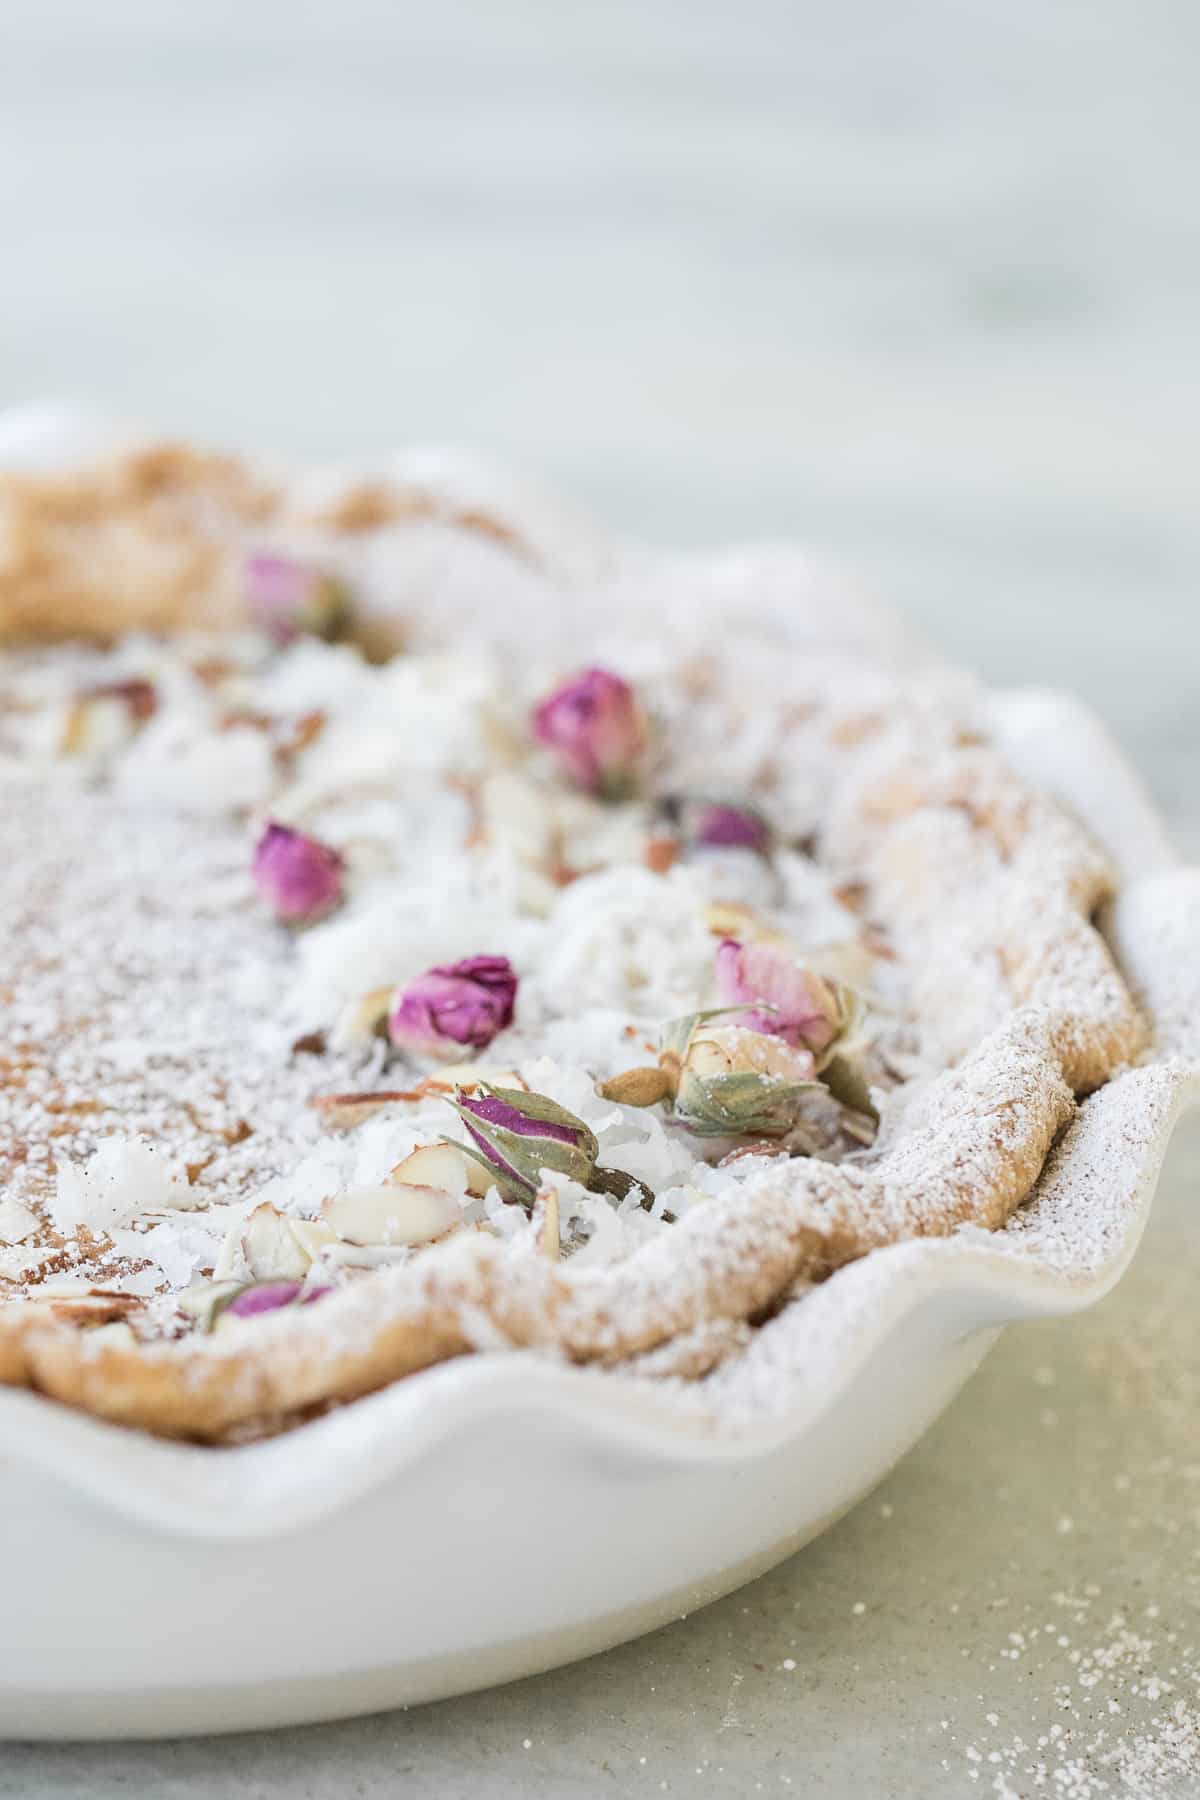 egg custard pie in a white pie dish with edible flowers and powdered sugar dusted over the top